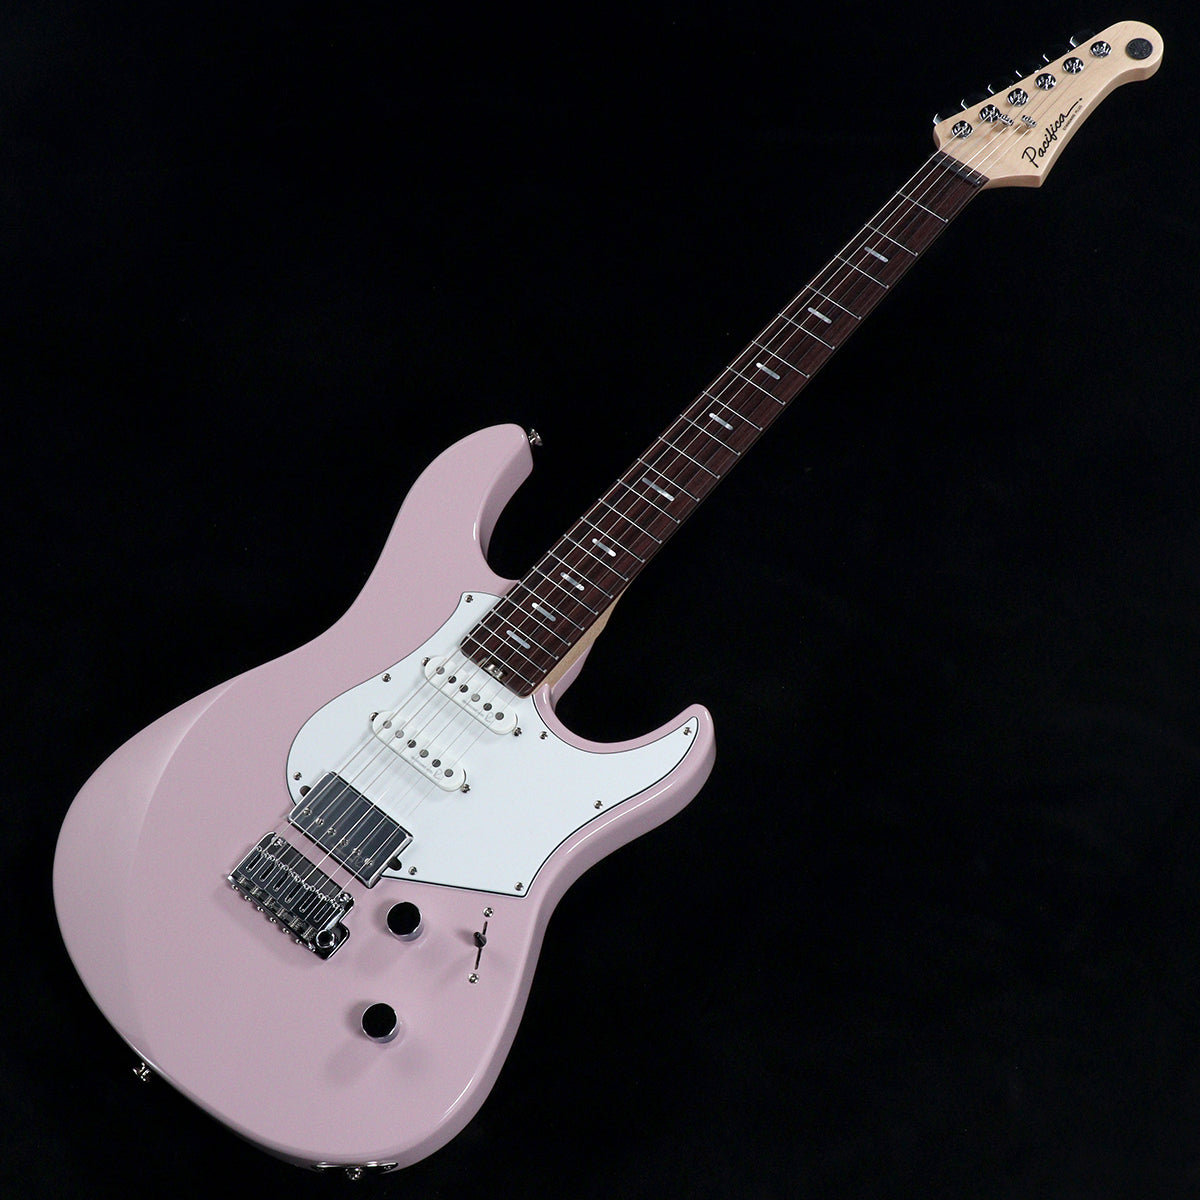 [SN IJY043104] YAMAHA / Pacifica Standard Plus - PACS+12ASP Ash Pink Rosewood Fingerboard(Weight:3.47kg) [05]